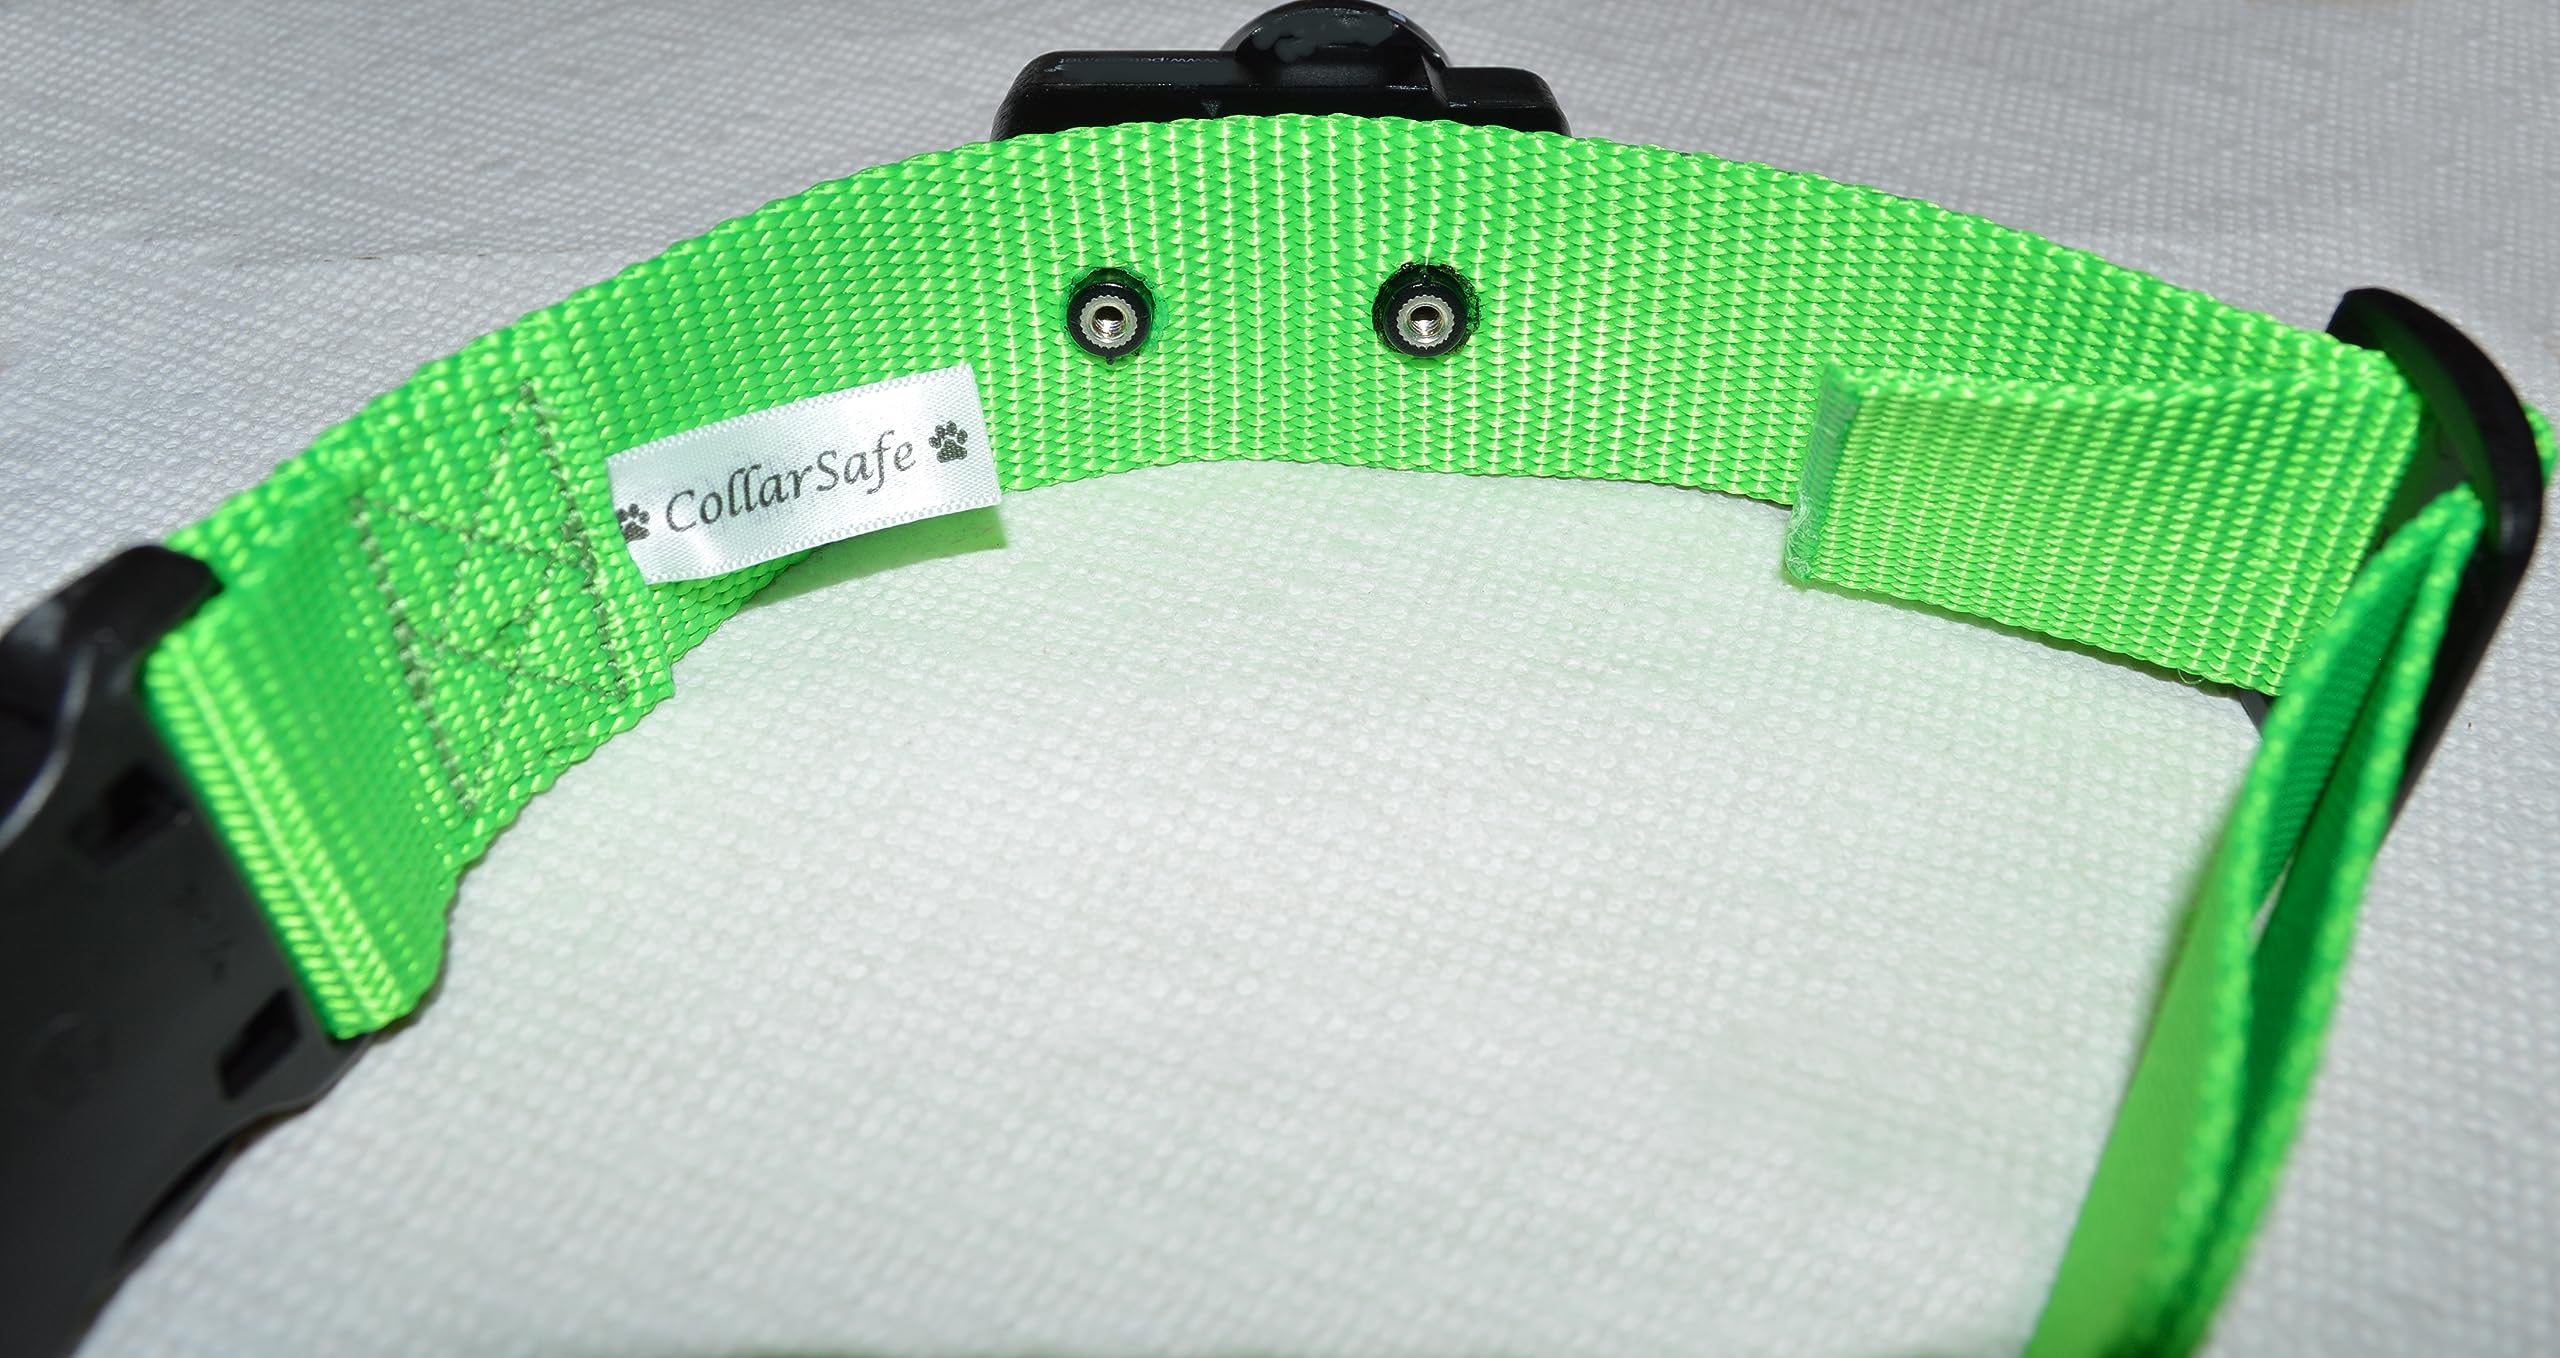 CollarSafe 1.5" Wide Big Dog XXL Designer Replacement Collar Fits Pet Safe 2-Hole Receiver modules 1-3/16" Apart (Fits Invisible Electric Underground Wireless Fence Containment Training bark